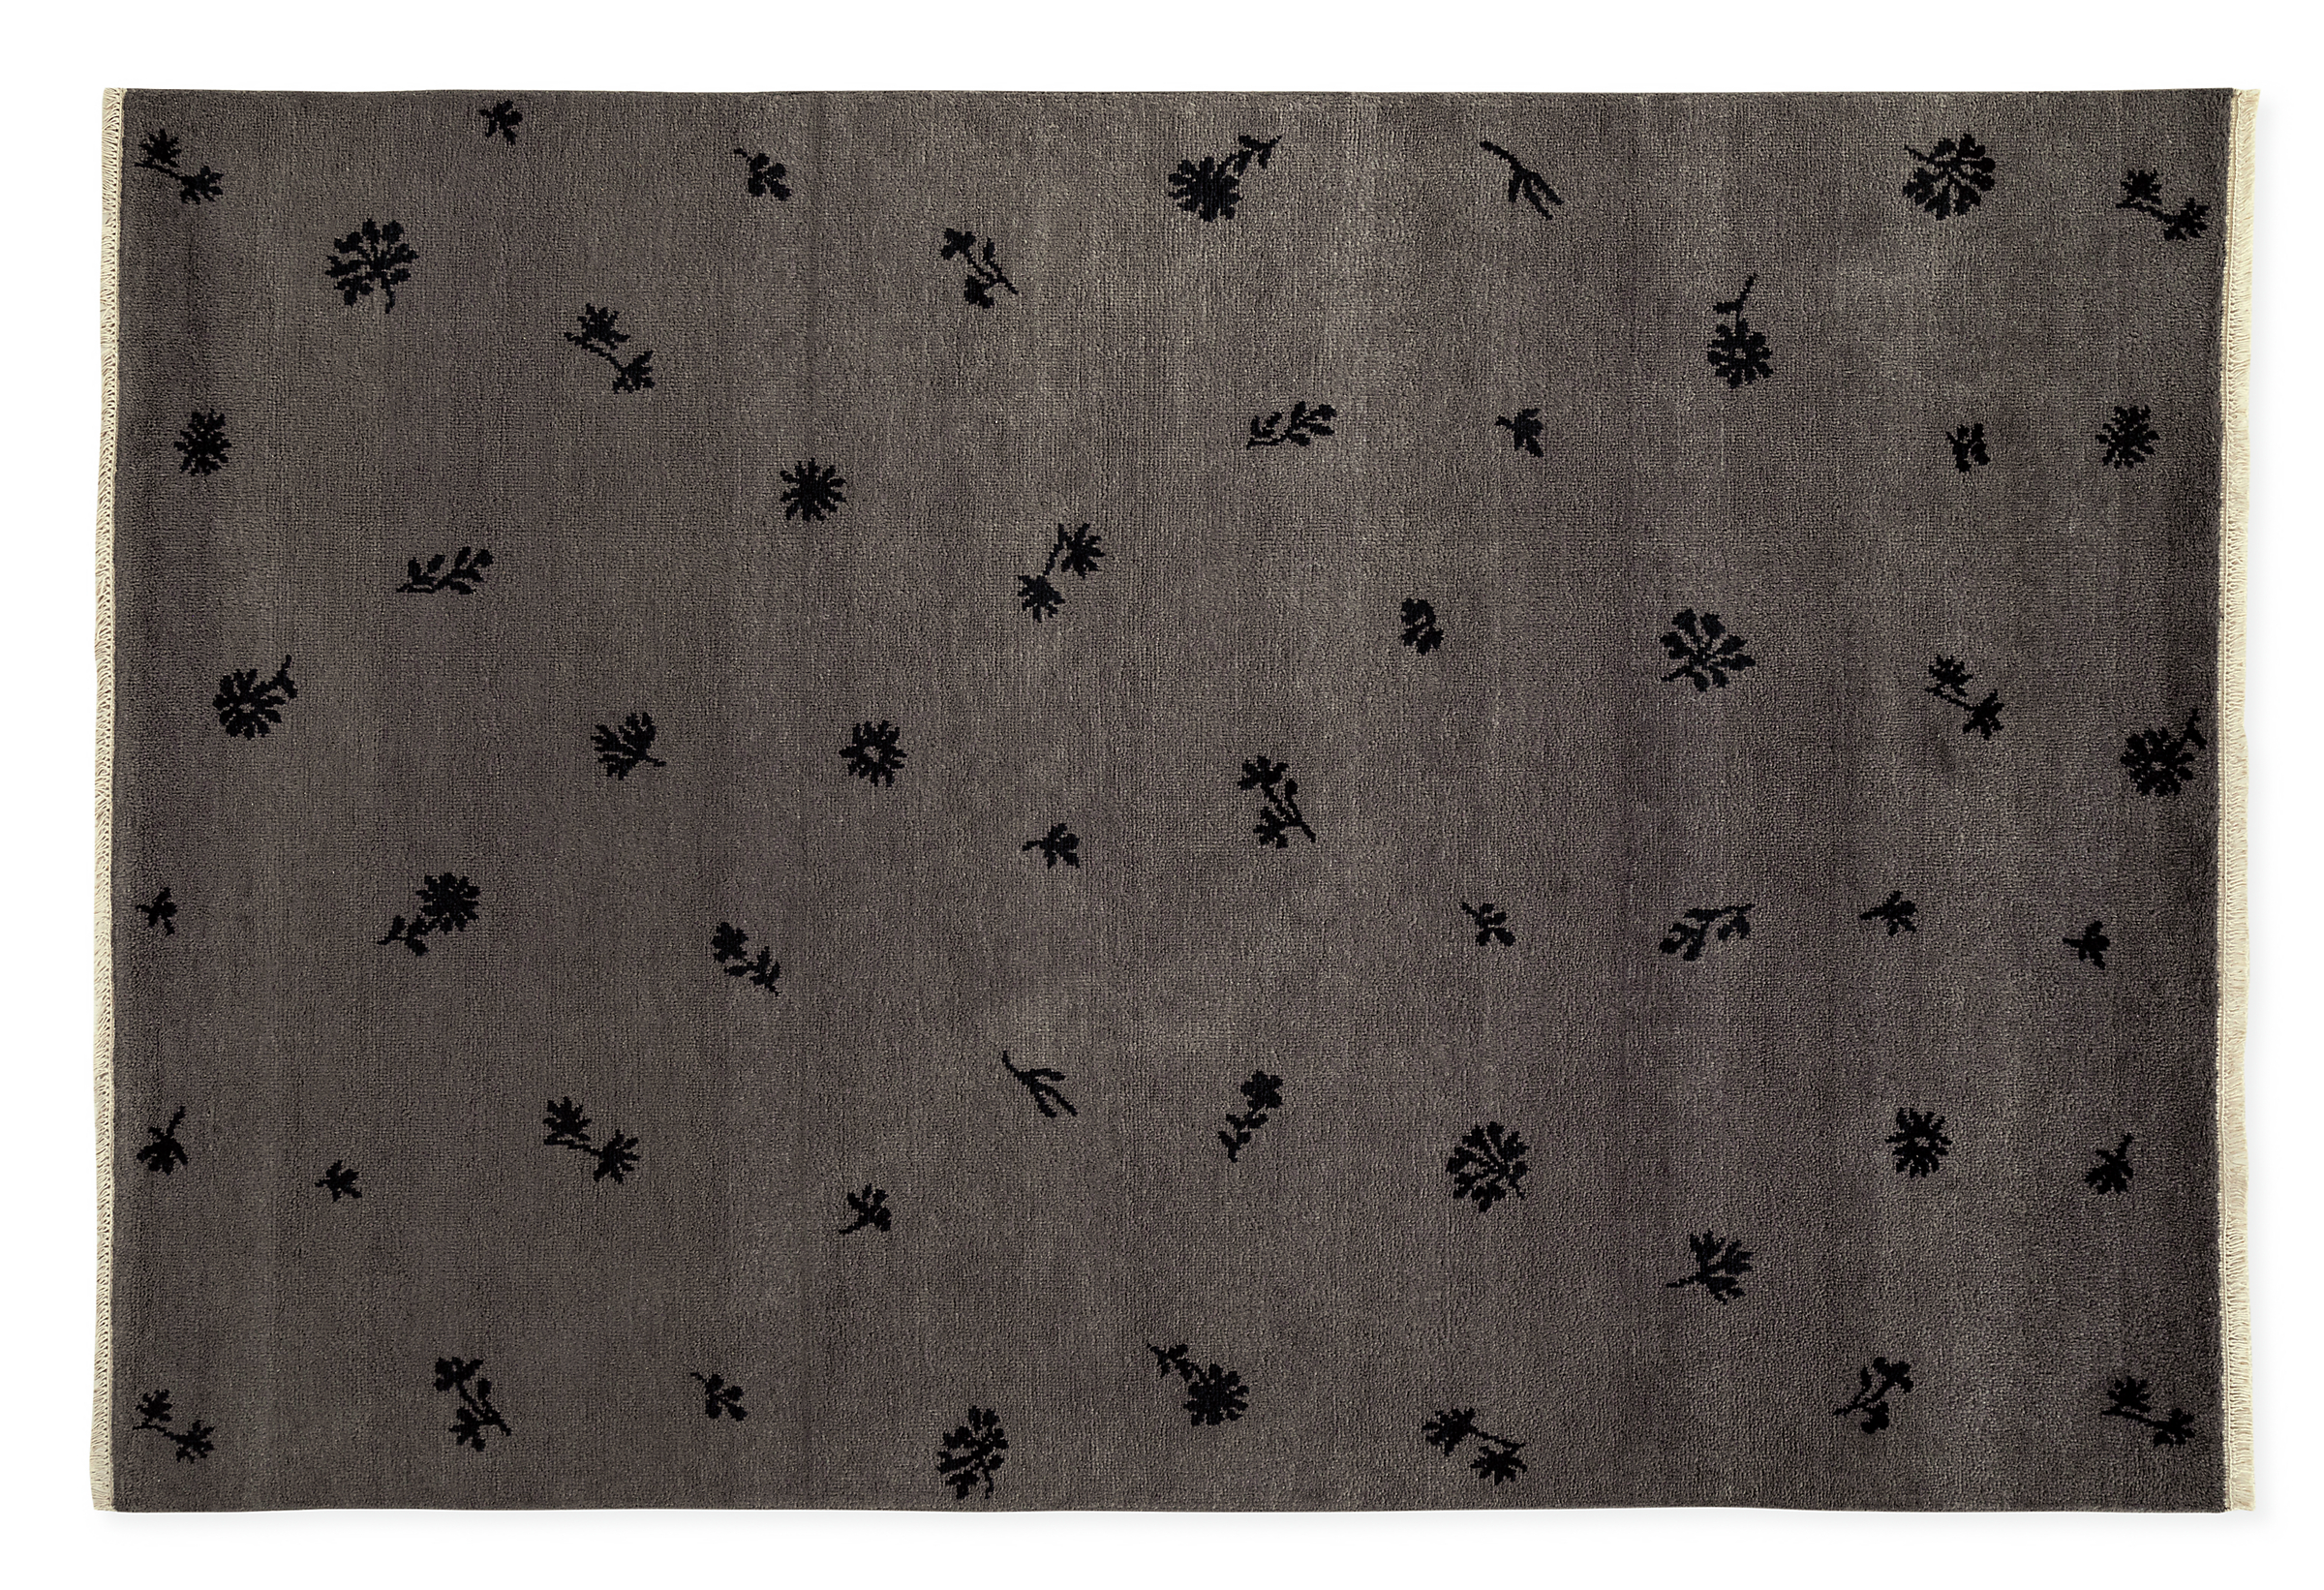 Tansy 6'x9' Rug in Charcoal/Black